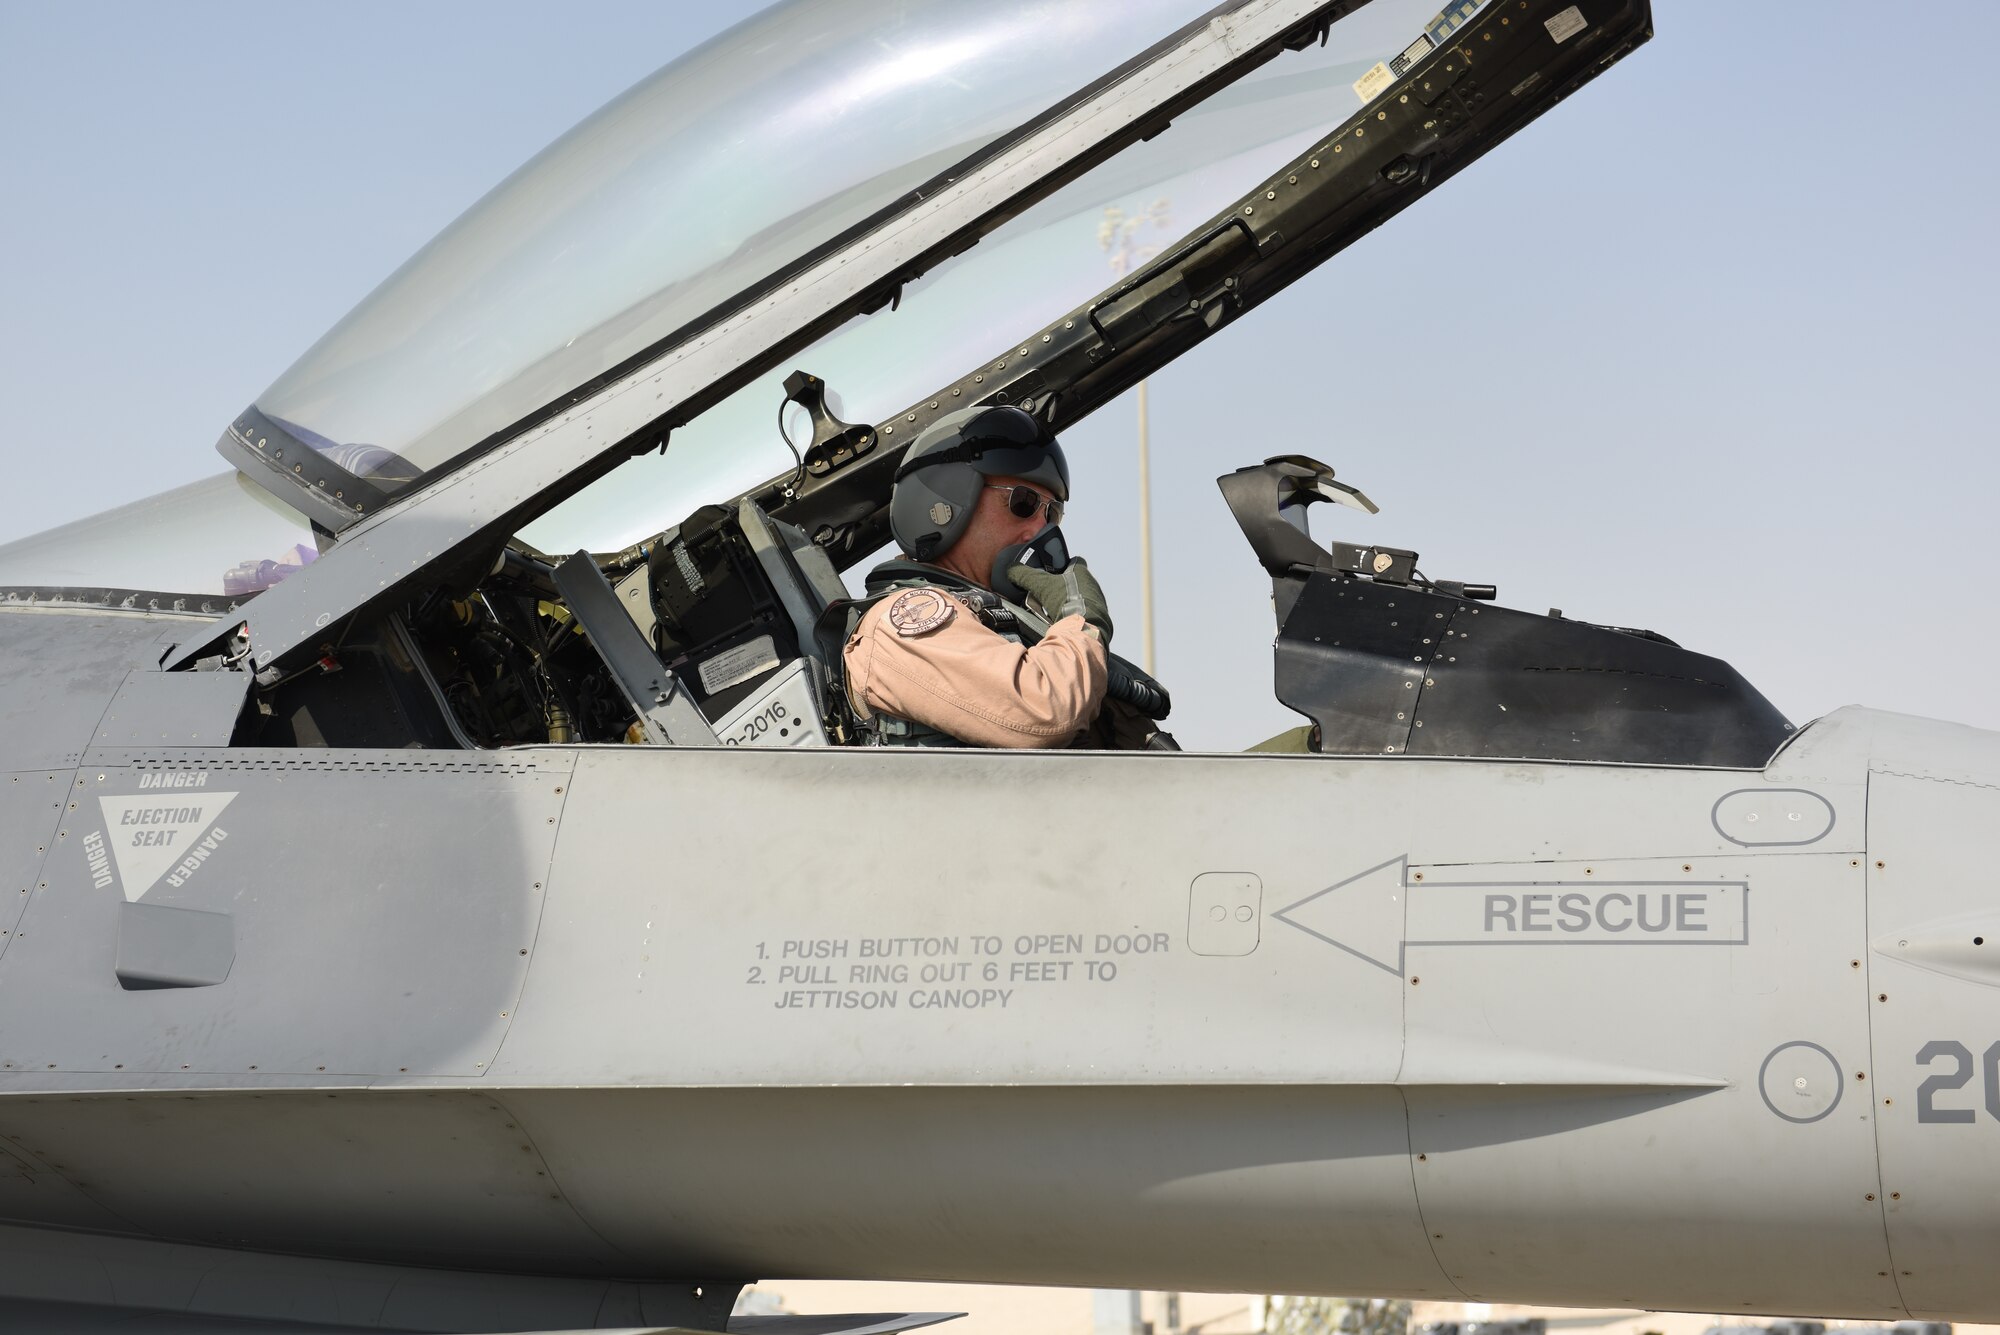 U.S. Air Force Lt. Gen. Joseph Guastella, commander of U.S. Air Forces Central Command and former commander of the 555th Fighter Squadron from October 2003 to July 2005, prepares for his flight in an F-16 Fighting Falcon at Al Udeid Air Base, Qatar Nov. 4, 2019.